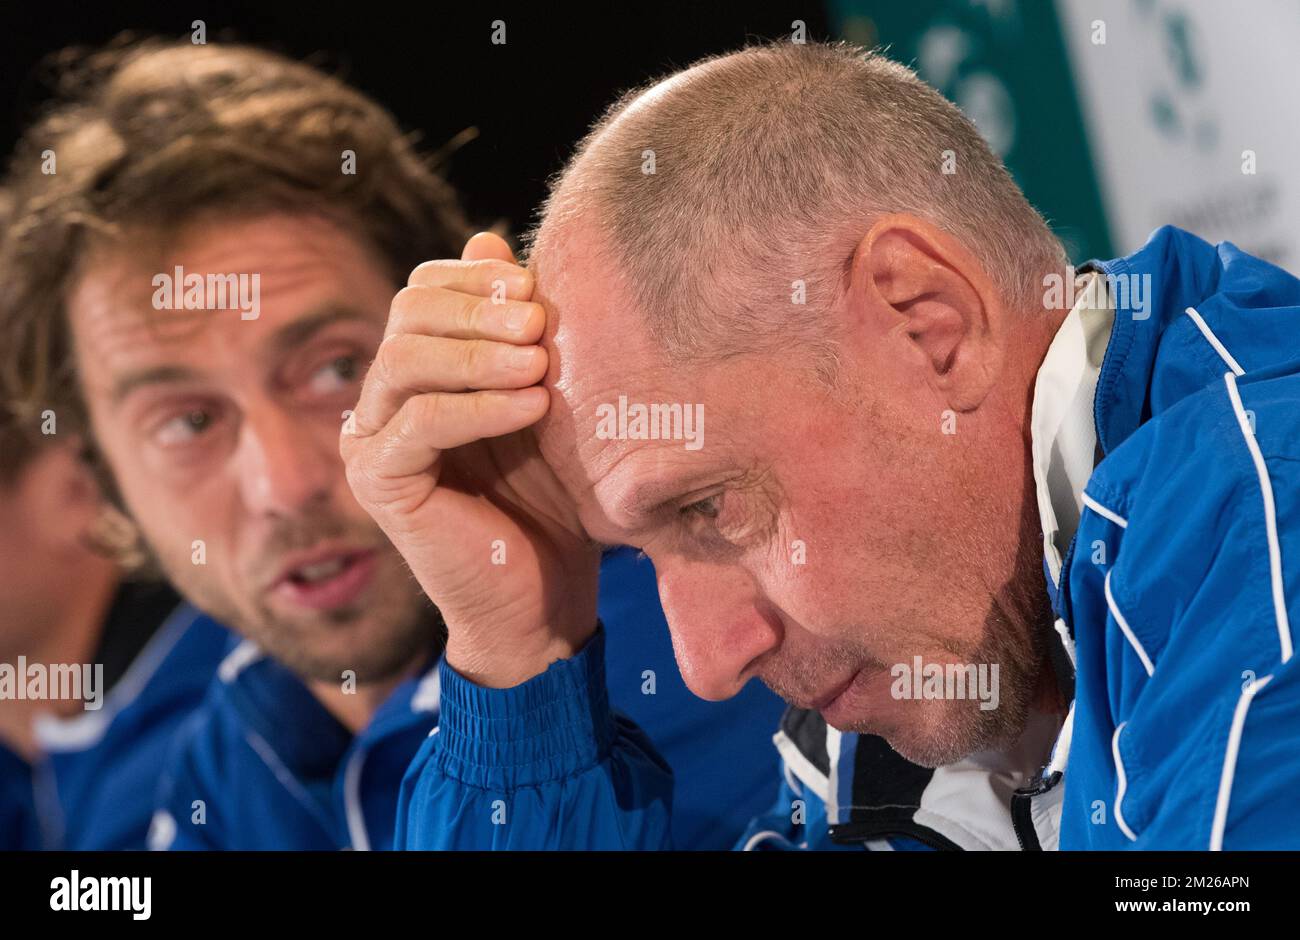 Italian Paolo Lorenzi and Italian captain Corrado Barazzutti pictured during a press conference of Italian team ahead of the Davis Cup World Group quarterfinal between Belgium and Italy, Tuesday 04 April 2017, in Charleroi. This Davis Cup game will be played from 07 to 09 April 2017 in Charleroi. BELGA PHOTO BENOIT DOPPAGNE Stock Photo